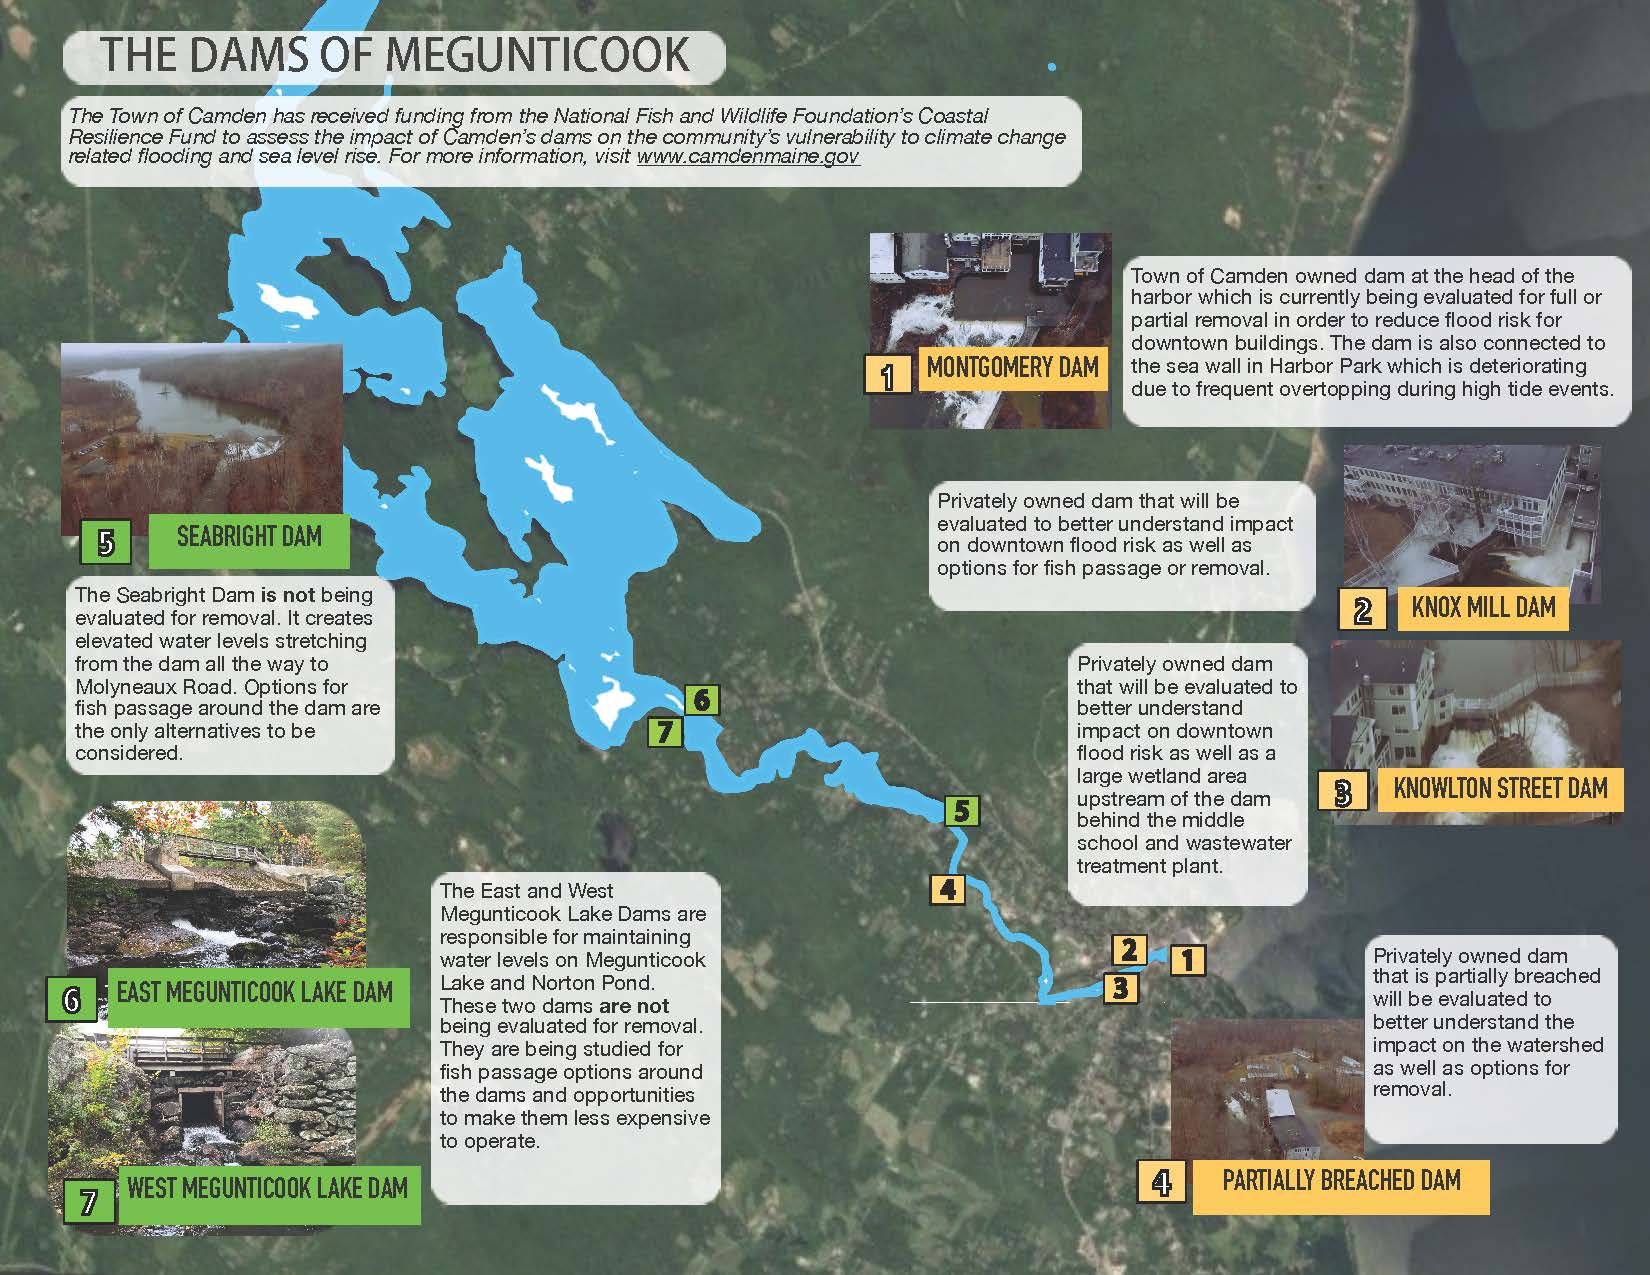 Dams of Megunticook reference guide